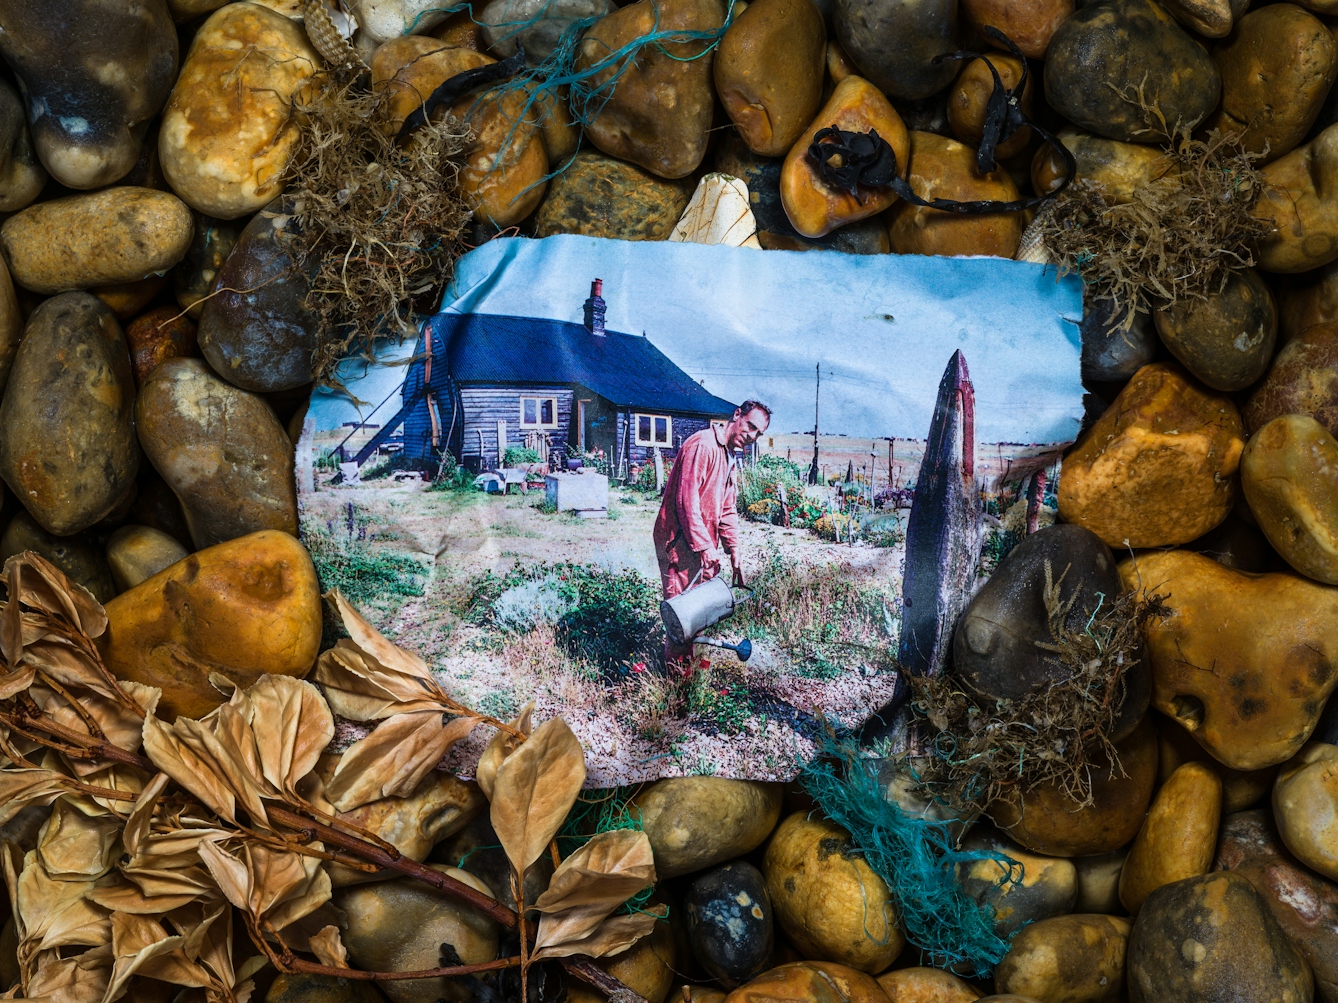 Photograph of a shingle beach made up of pebbles of all different sizes and shapes with a mix of brown and yellow hues. Nestled in the pebbles is a colour photographic print, soaked in sea water such that it has taken on the shape of the stones beneath. The print show Derek Jarman standing in the garden of his Dungeness cottage, in the process of watering his plants with a galvanised watering can. He is looking up smiling to camera. Surrounding the print on the stones are sea shells, sprigs of beachfront vegetation and the frayed blue nylon threads of fishing nets.